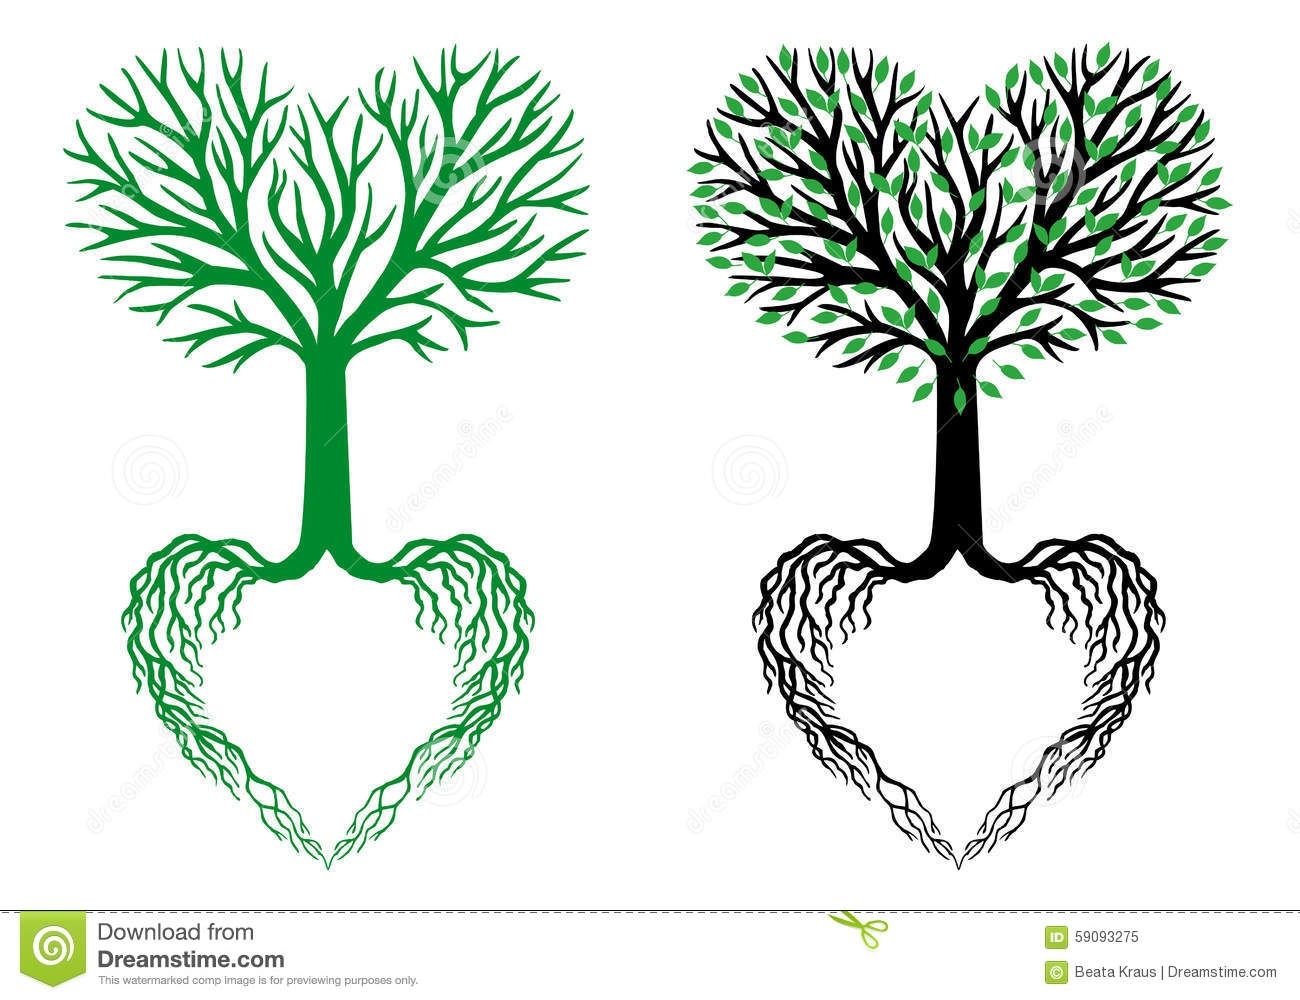 Roots gift ideas heart. Clipart tree life